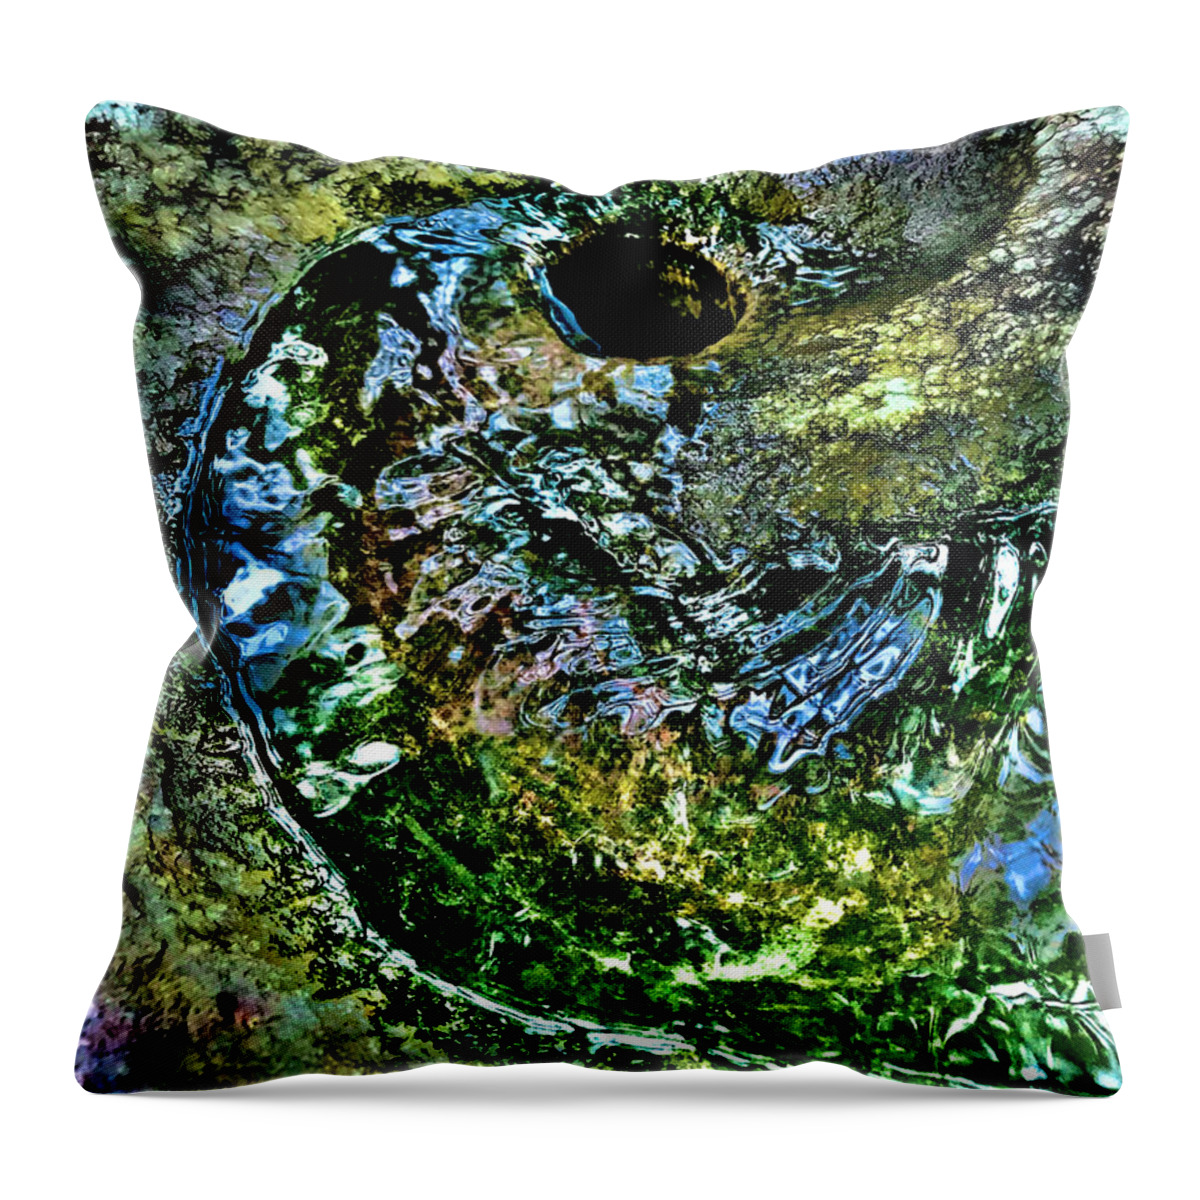 Water Throw Pillow featuring the photograph Finality by Tom Johnson